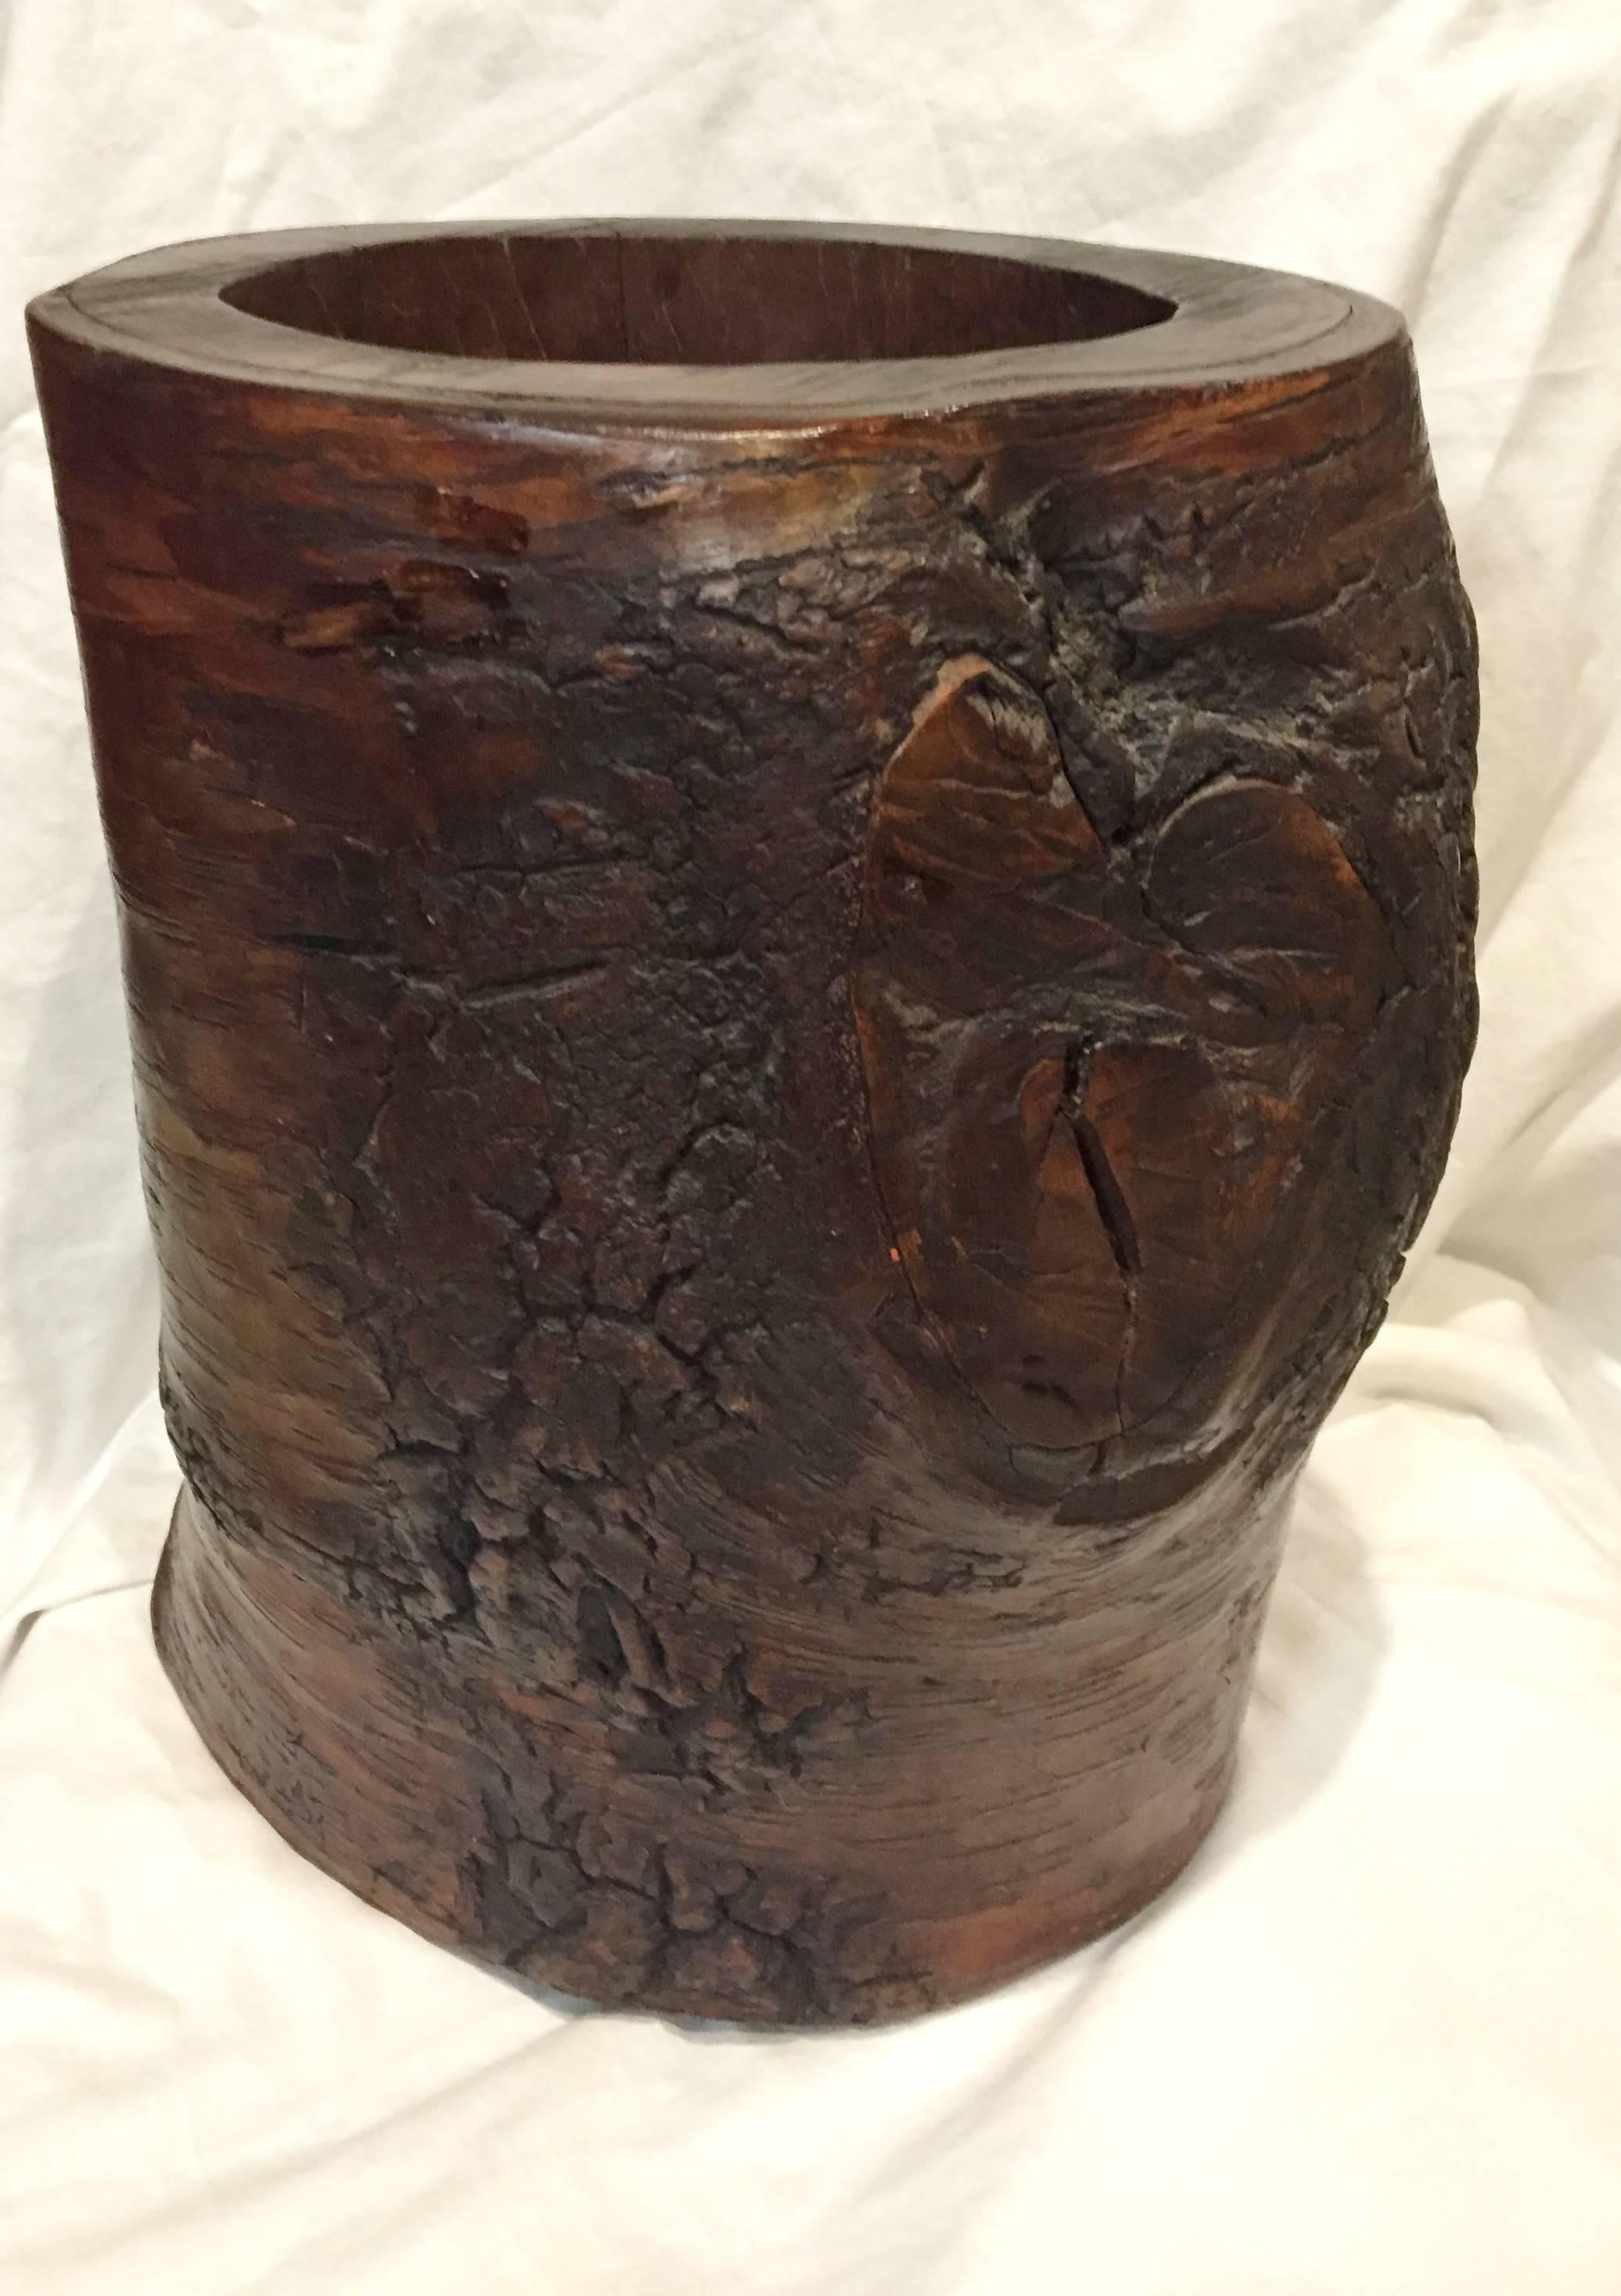 Amazing solid jujube tree stump hollowed to form an organic brush holder or a planter/vase.

The piece is substantial, very heavy and all natural. It works perfectly in many decors. With or without any additional materials within, this is an